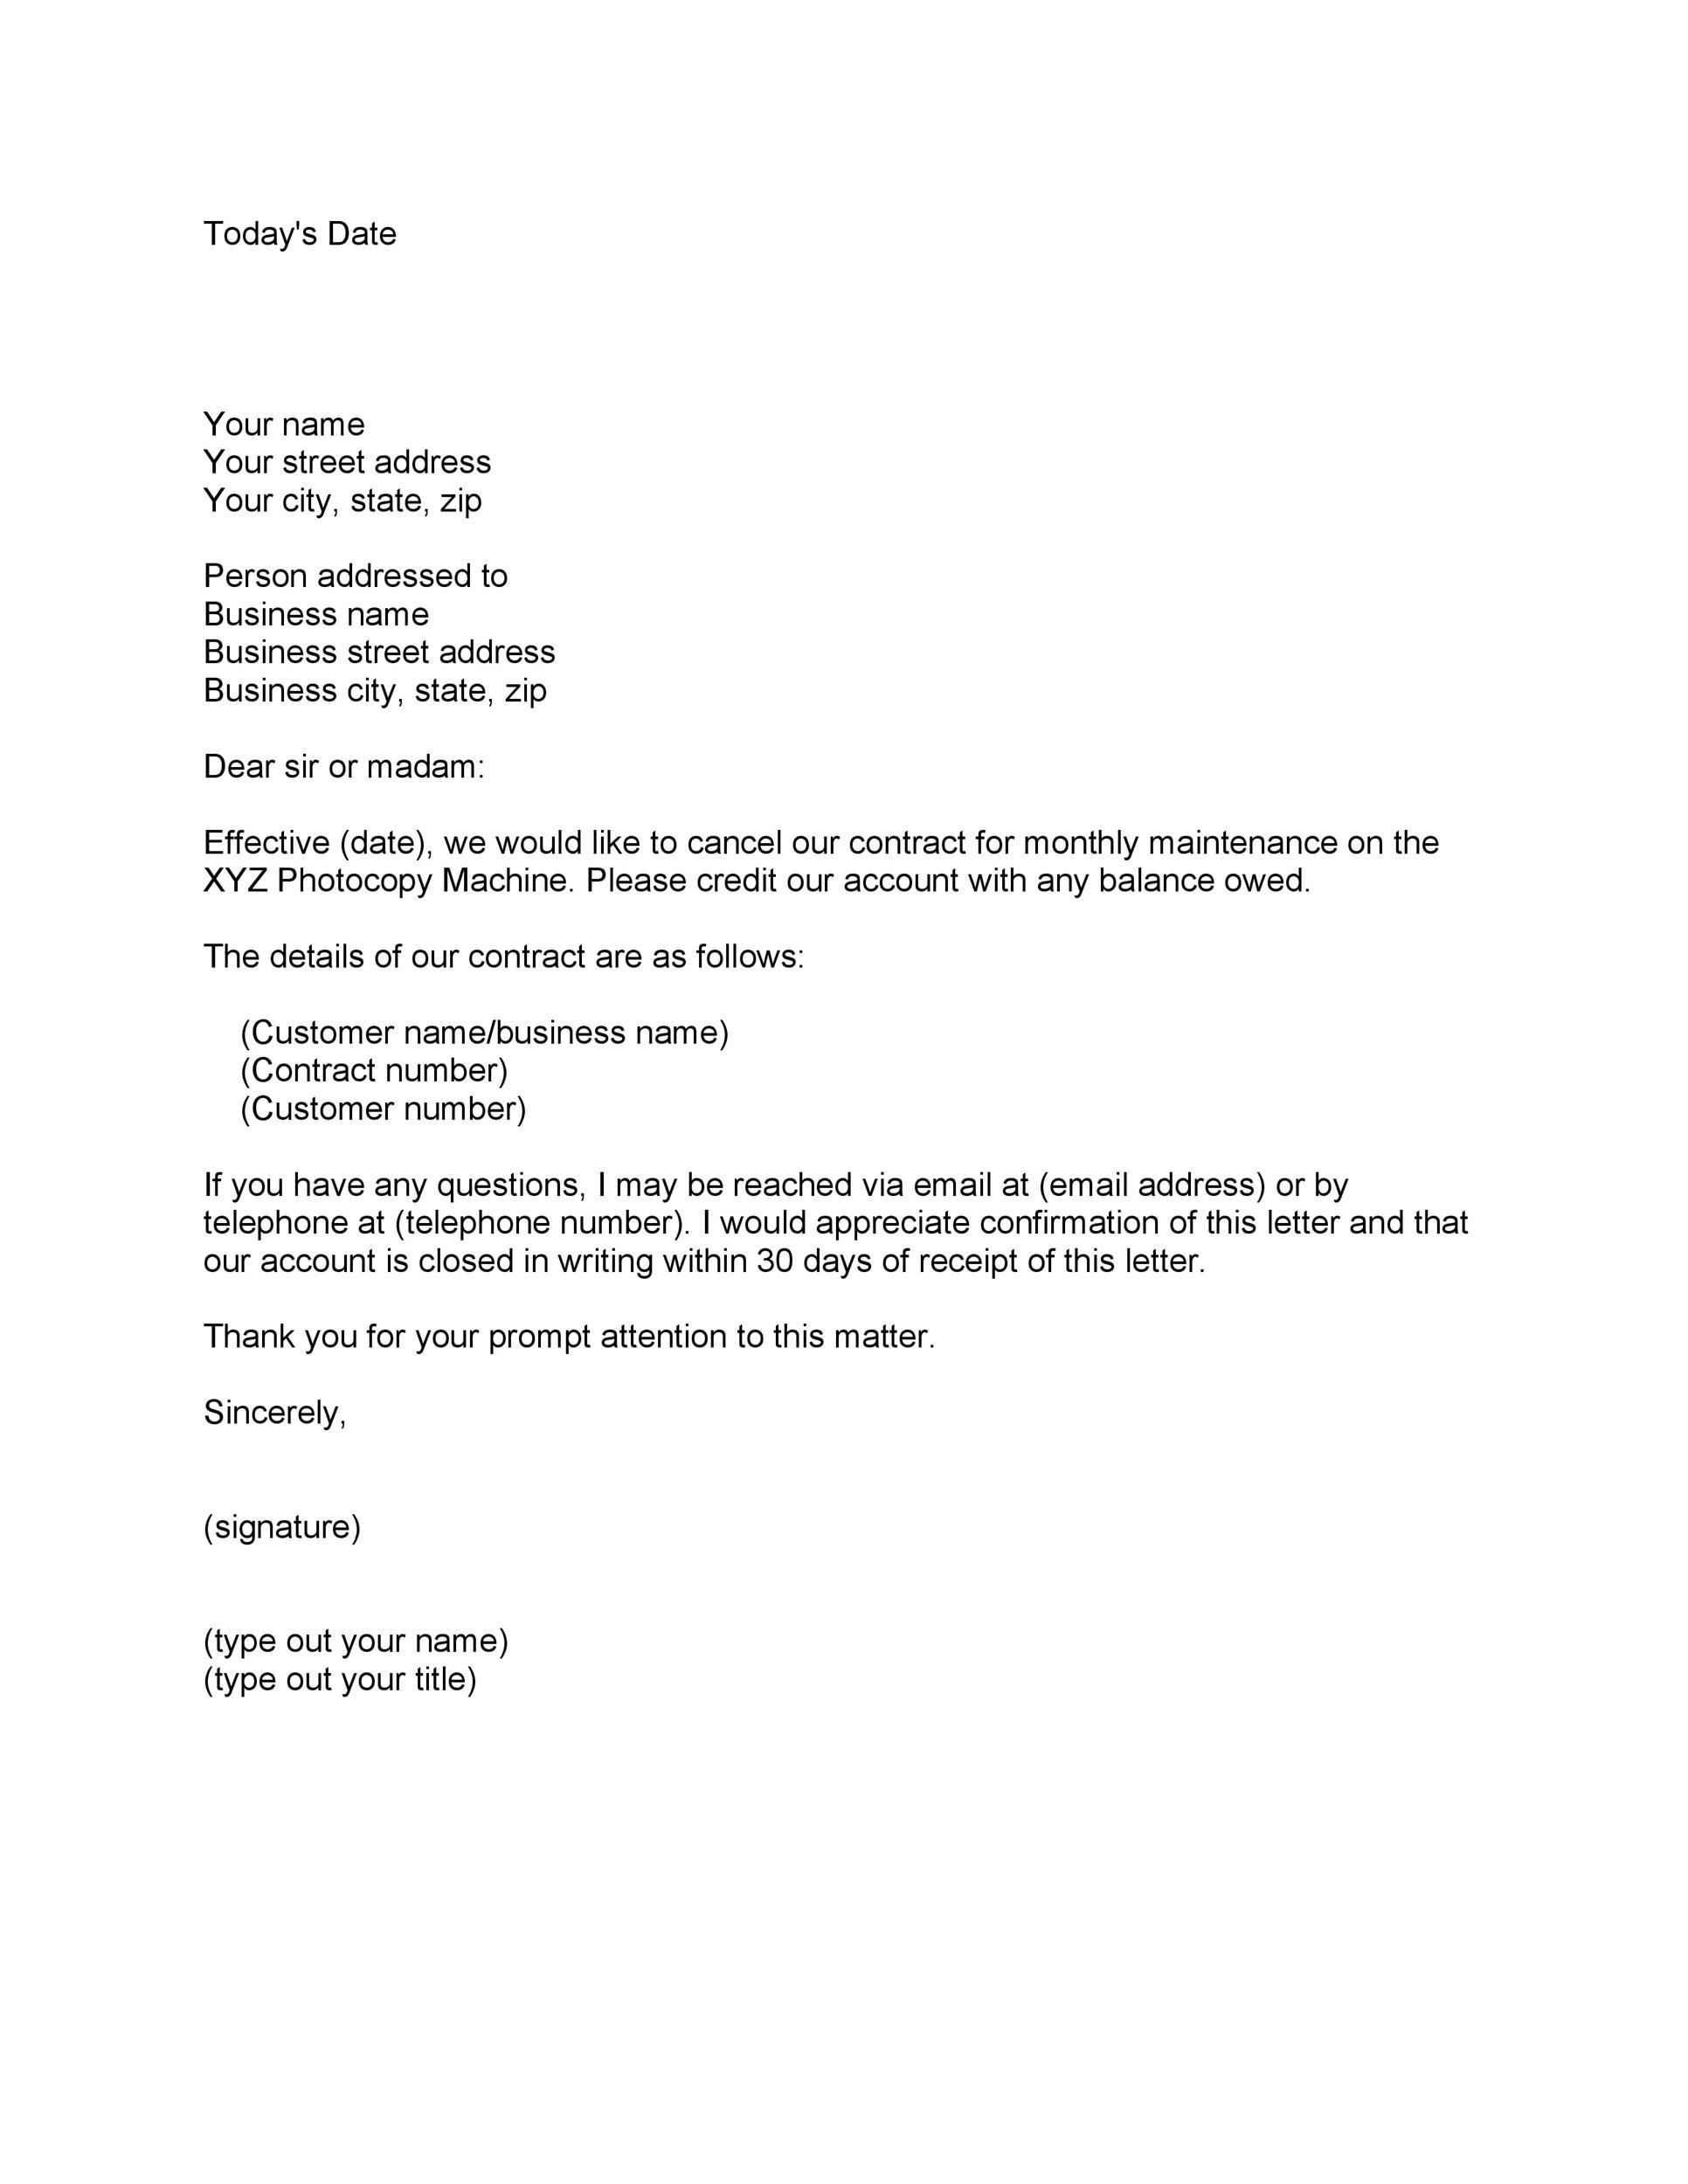 Writing service cancellation letter